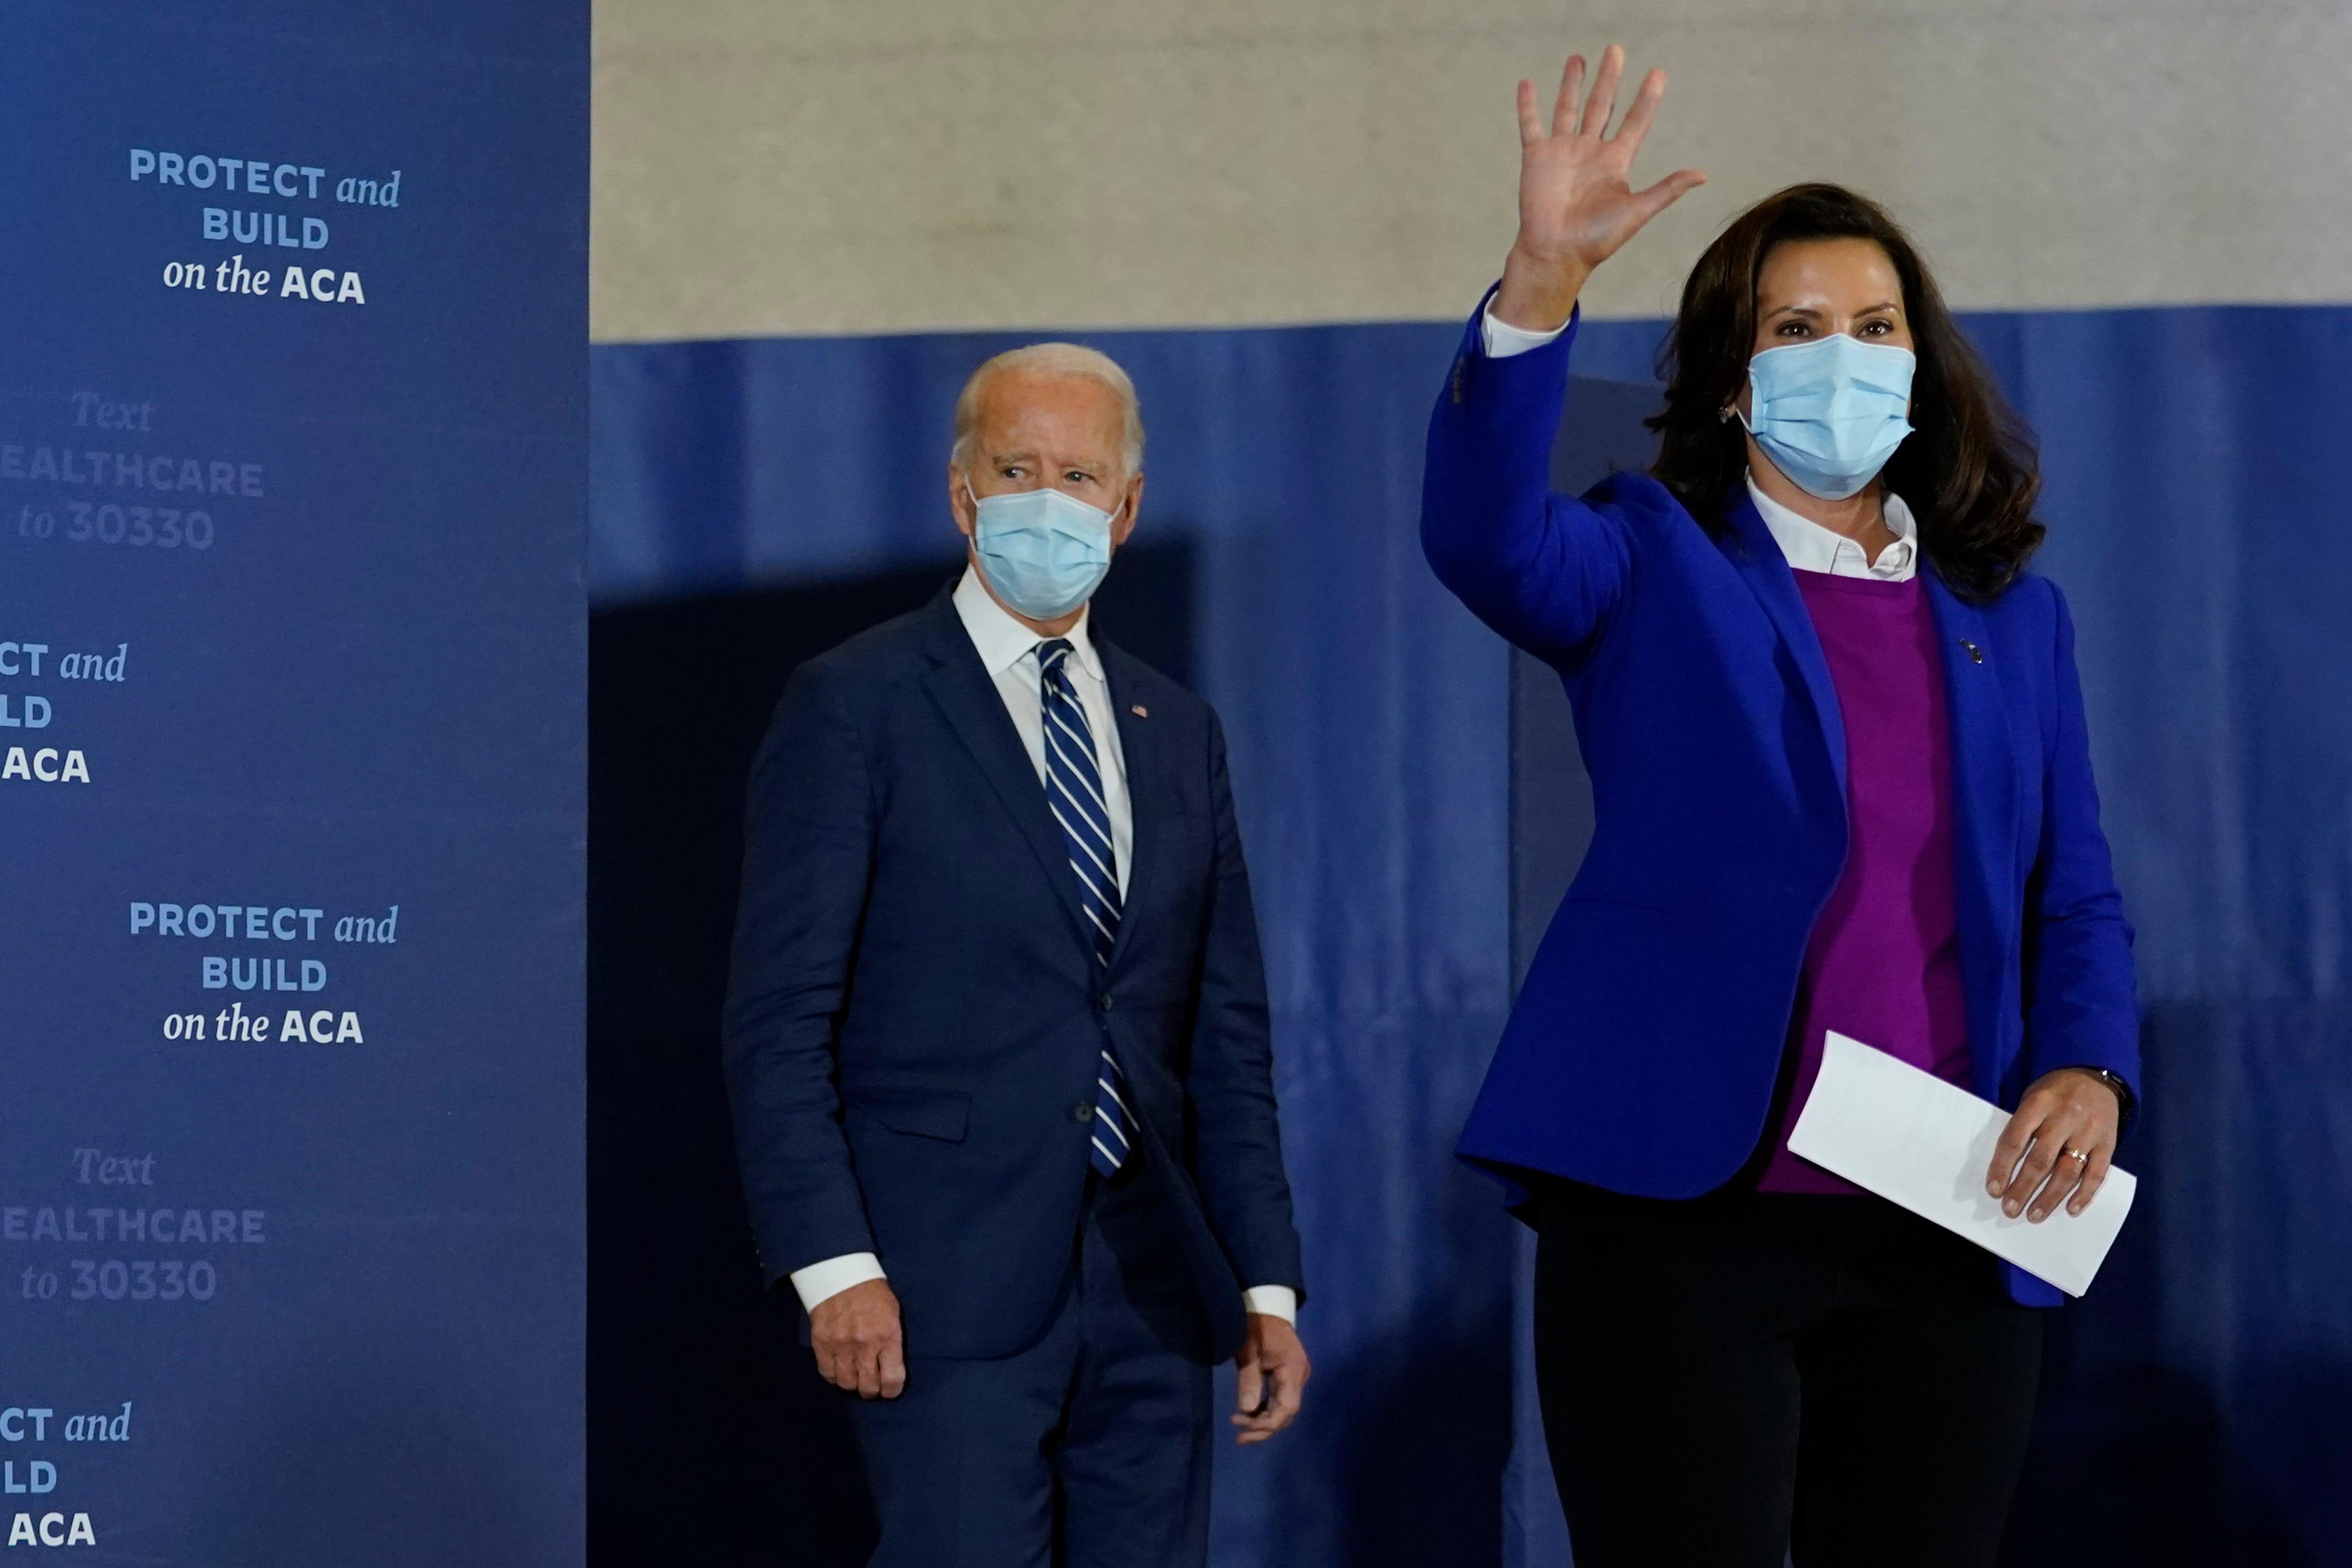 Democratic presidential candidate former Vice President Joe Biden and Michigan Governor Gretchen Whitmer arrive to speak at Beech Woods Recreation Center, in Southfield, Mich., Friday, Oct. 16, 2020.